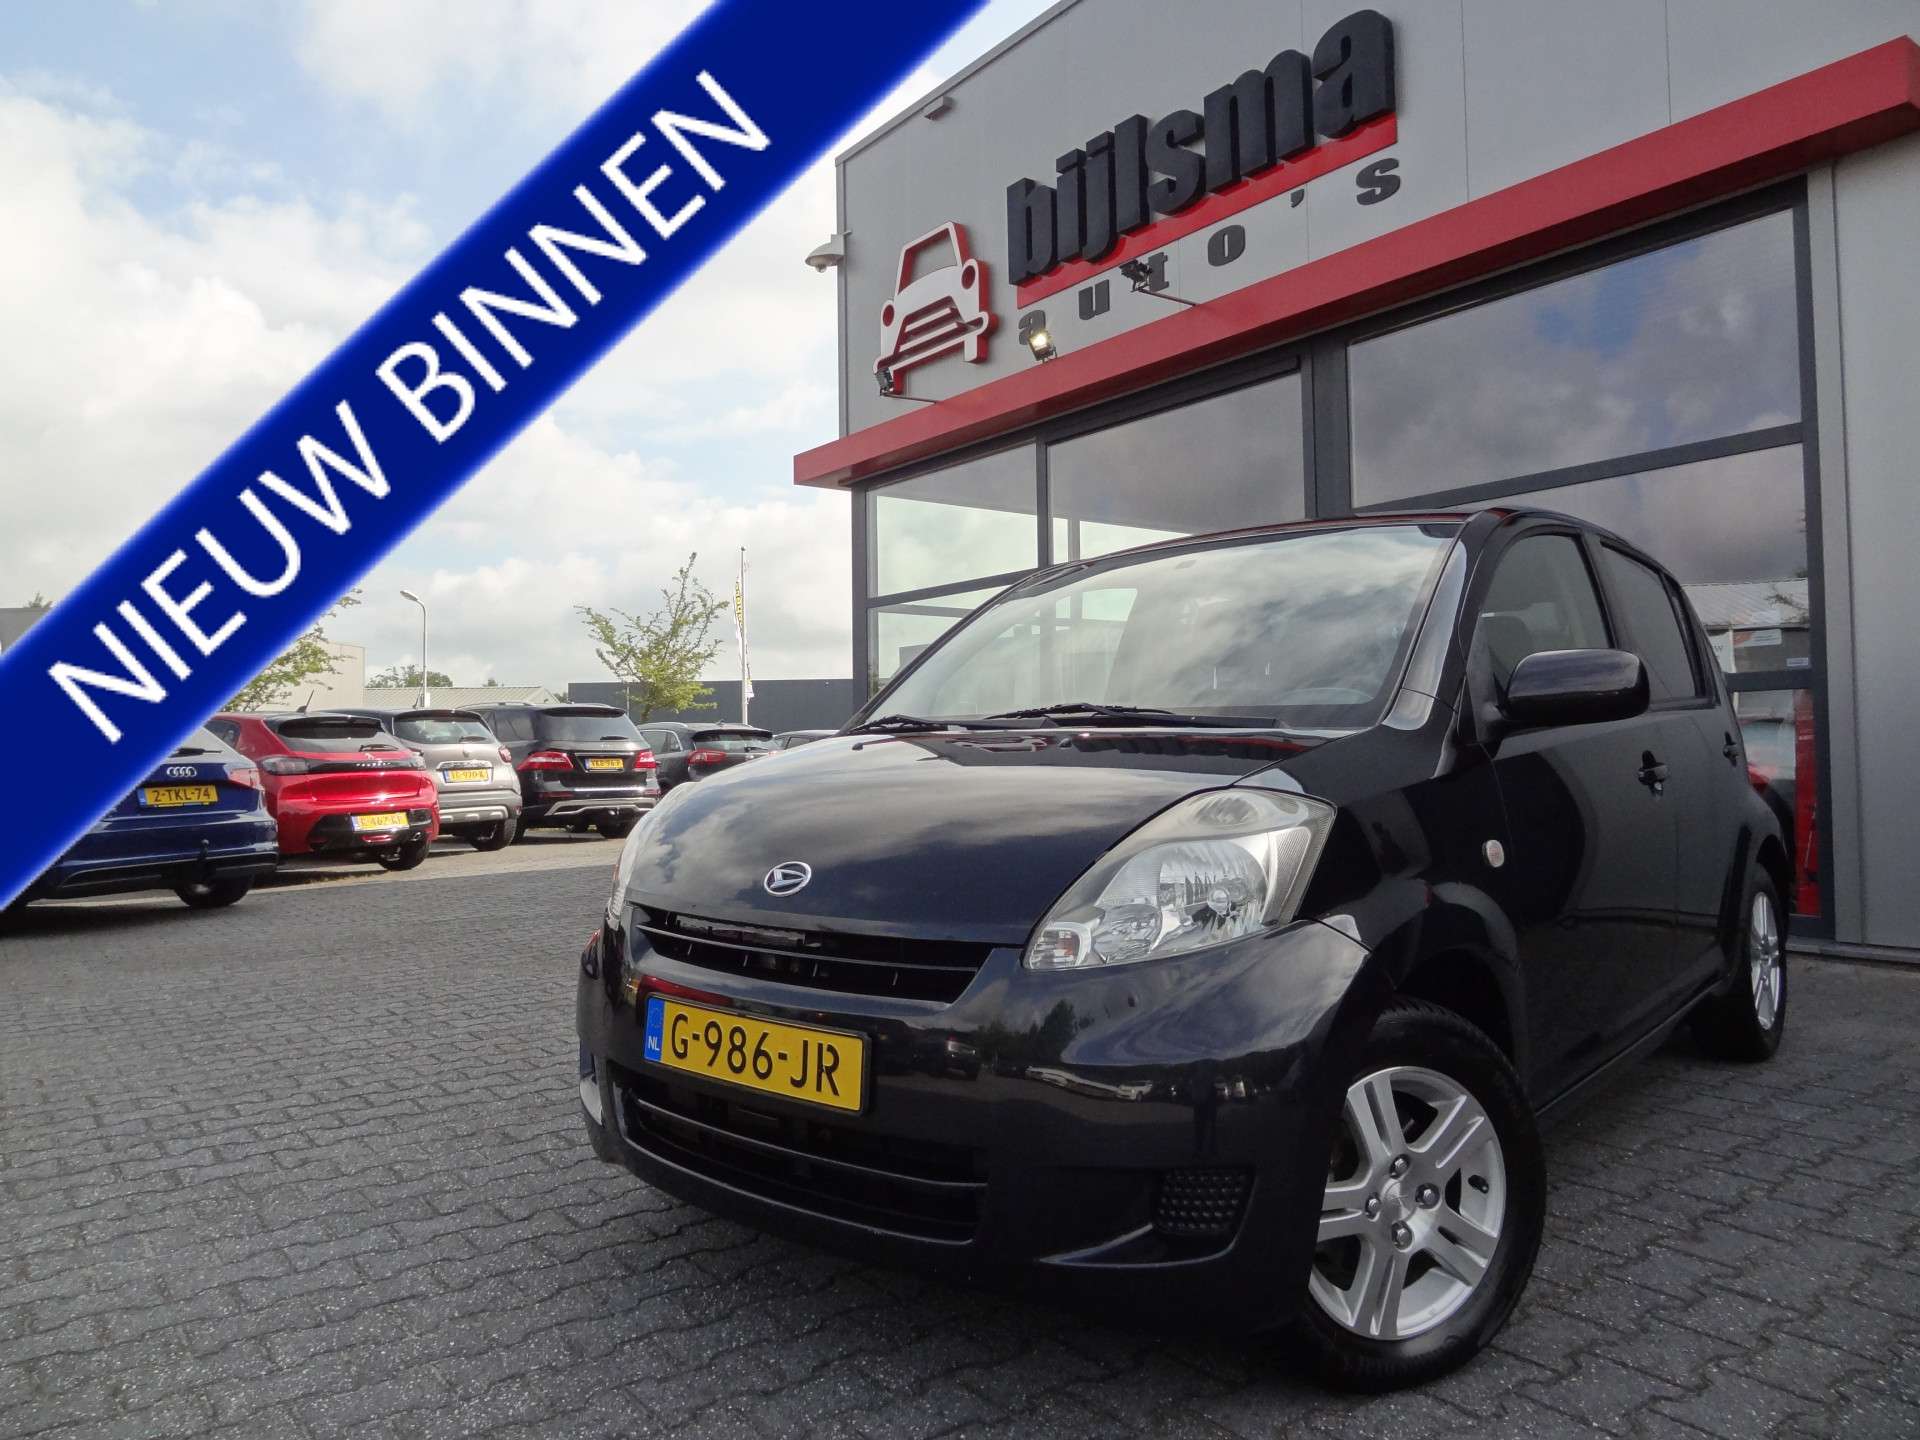 Daihatsu Sirion Compact in Black used in SURHUISTERVEEN for € 3,999.-